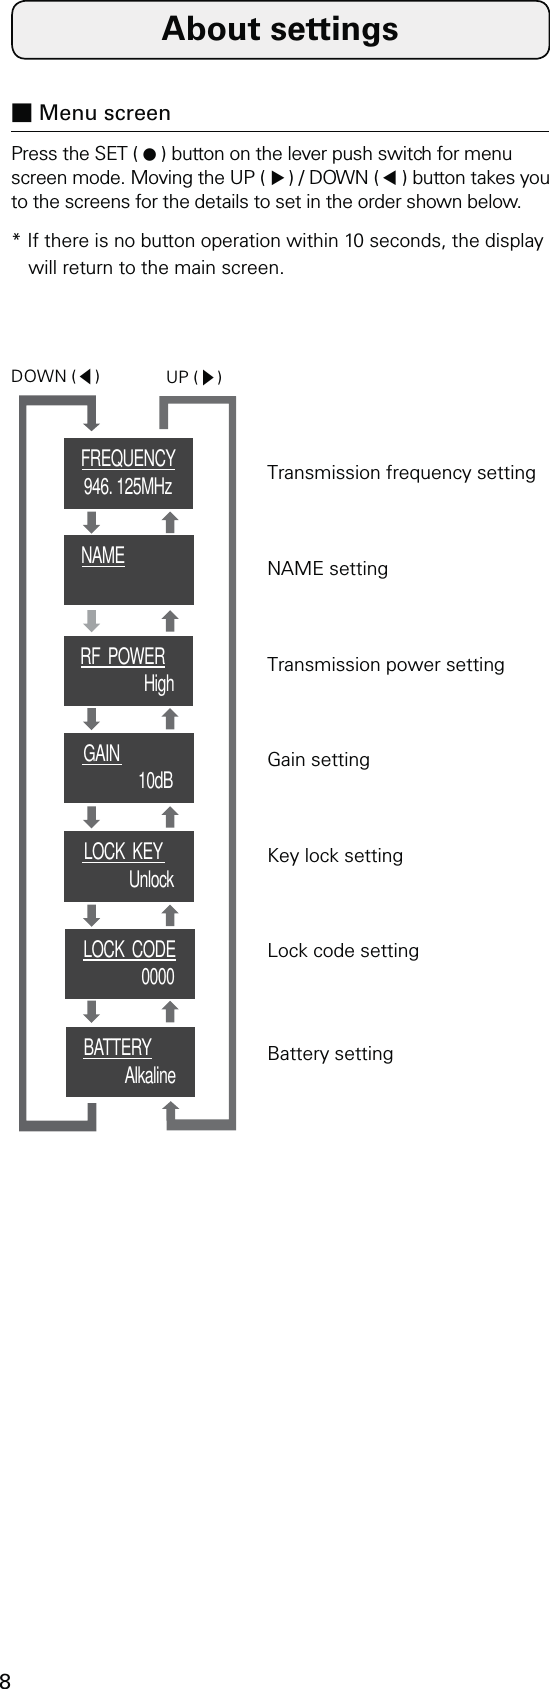 8Transmission frequency settingNAME settingTransmission power settingGain settingKey lock settingLock code settingBattery settingFREQUENCY946. 125MHzNAMEvRF  POWERHighGAIN 10dBLOCK  KEYUnlockLOCK  CODE0000BATTERYAlkalineNAMEGAIN 10dBLOCK  KEYUnlockBATTERYAlkalineLOCK  CODE0000DOWN (◀)UP (▶)About settings* If there is no button operation within 10 seconds, the display will return to the main screen.■ Menu screenPress the SET ( ٴ) button on the lever push switch for menu screen mode. Moving the UP (㌣) / DOWN ( ㌢) button takes you to the screens for the details to set in the order shown below.